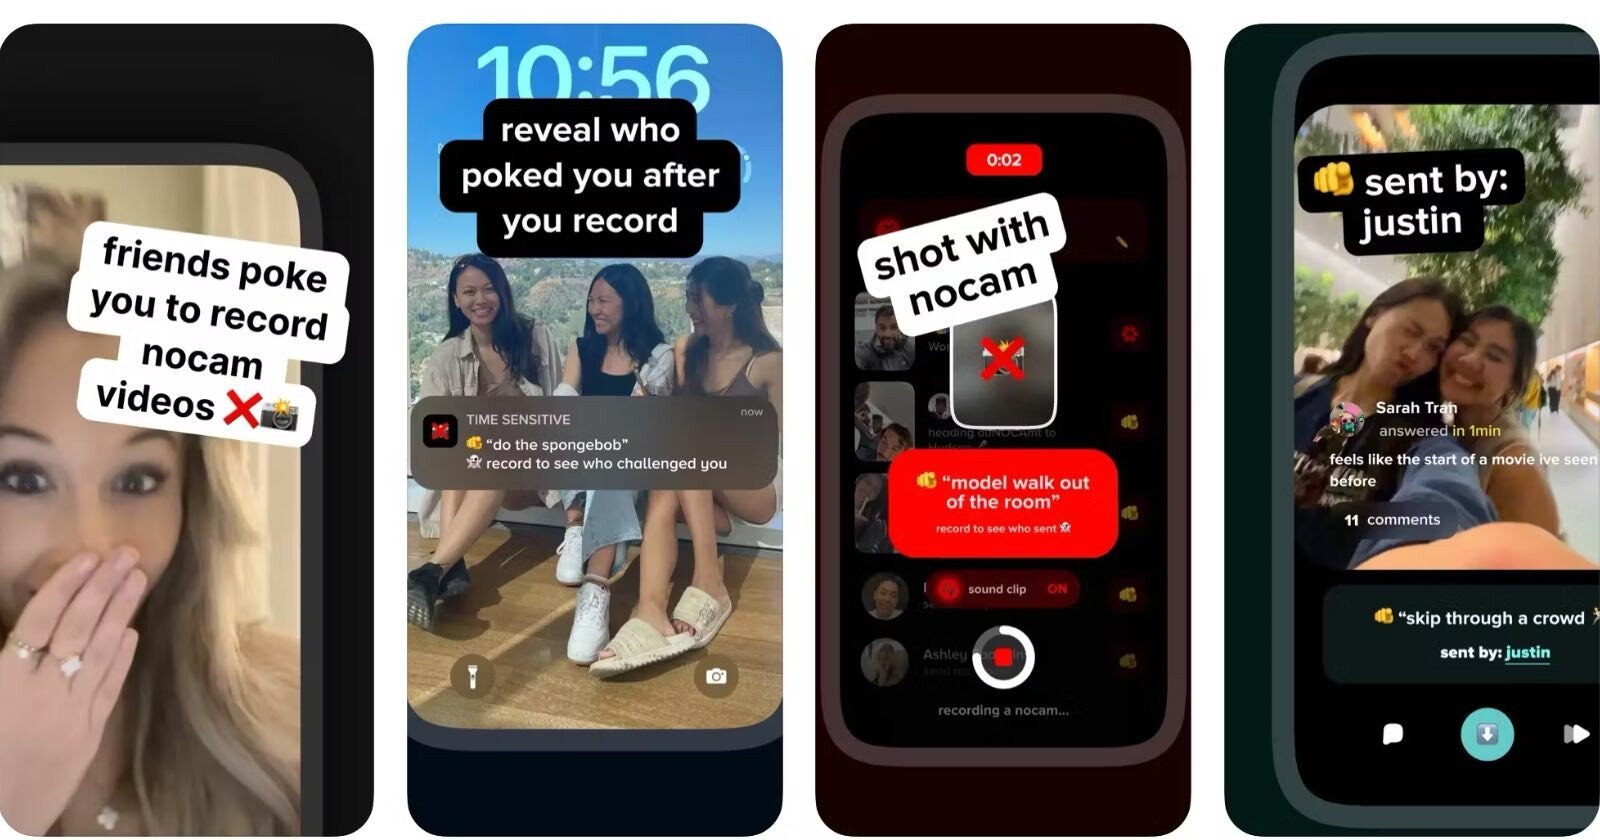 Nocam is a New Social Video App That Doesnt Let You See The Camera